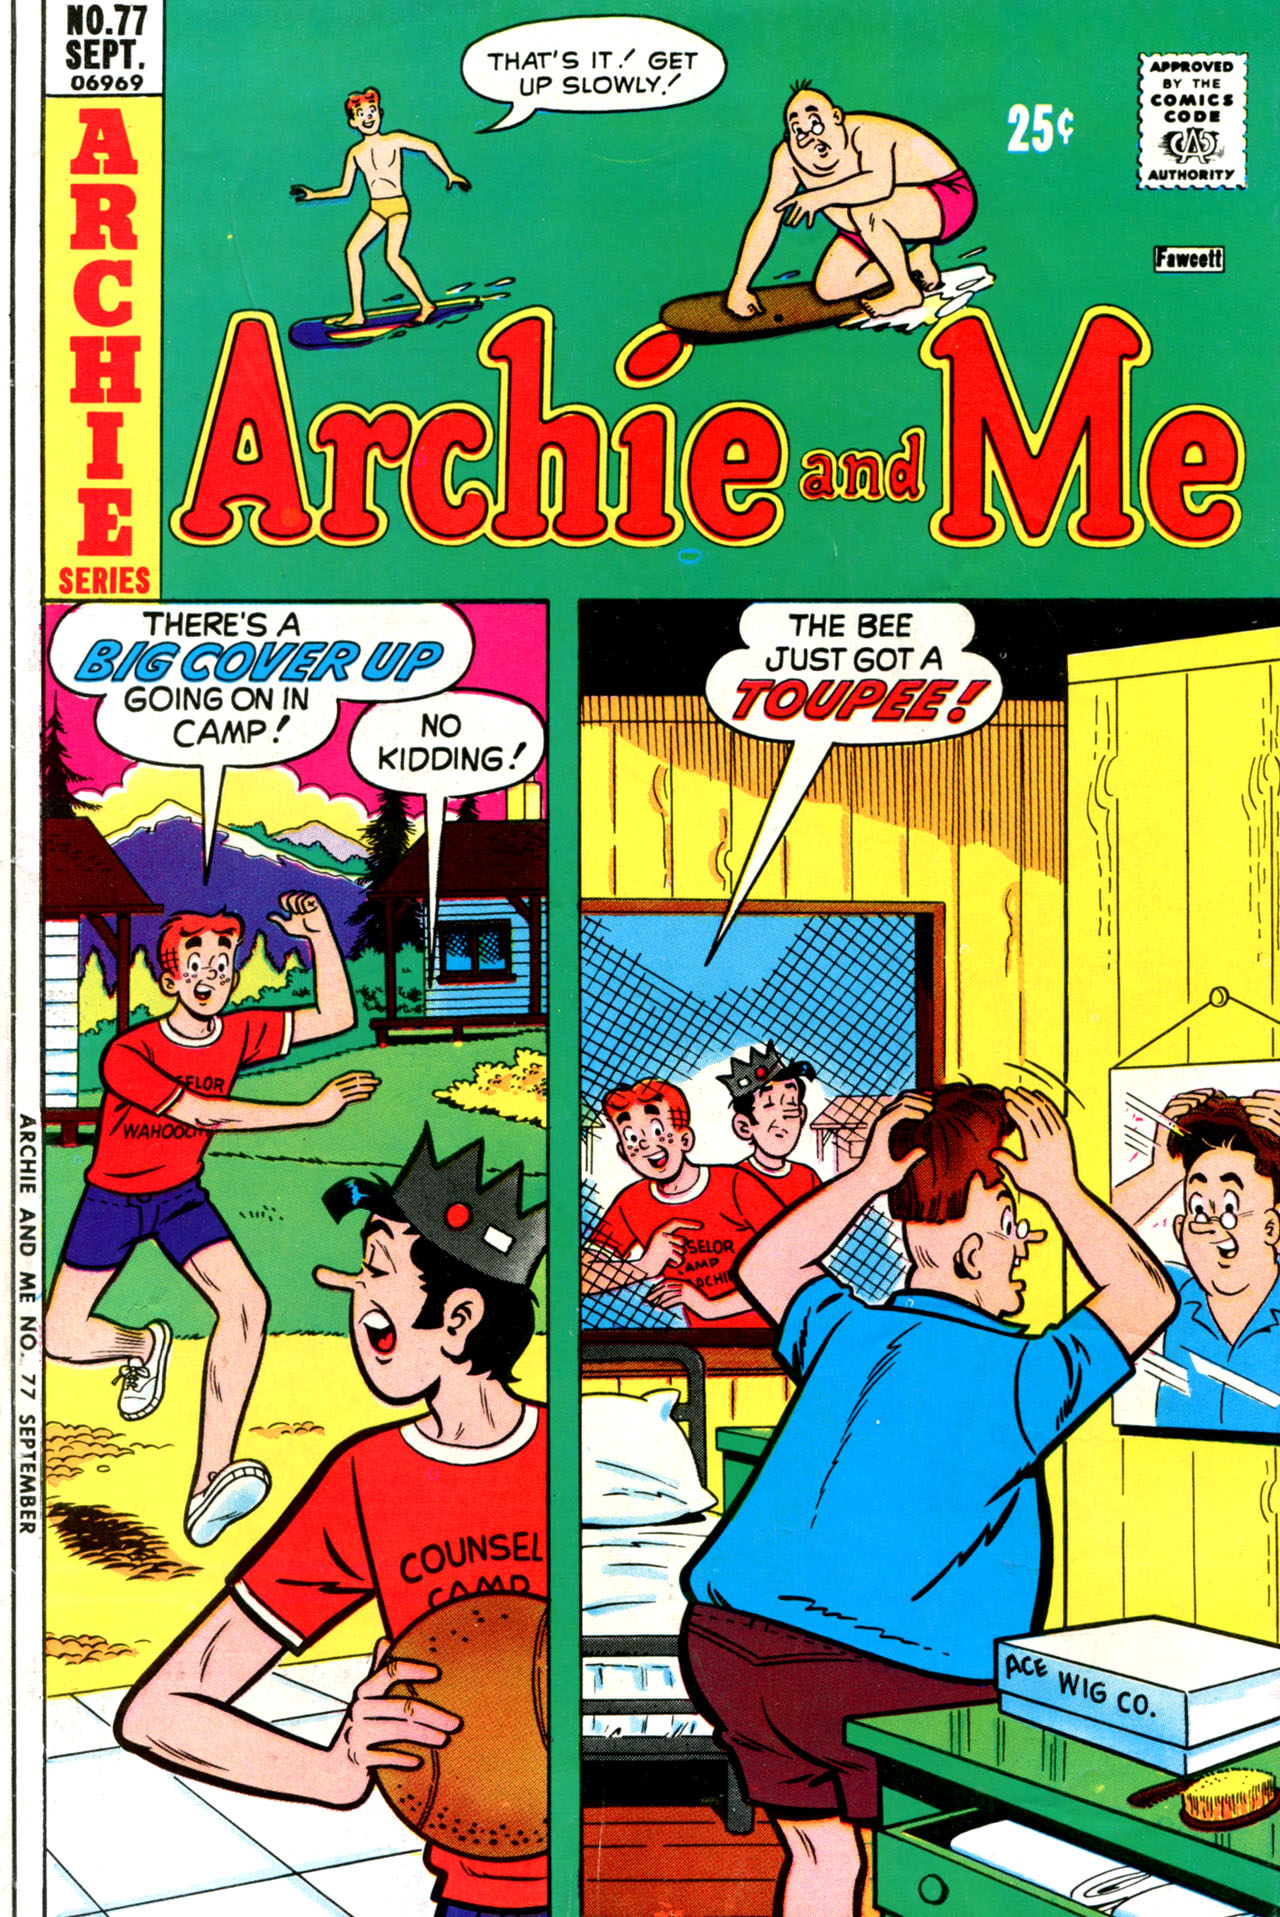 Read online Archie and Me comic -  Issue #77 - 1